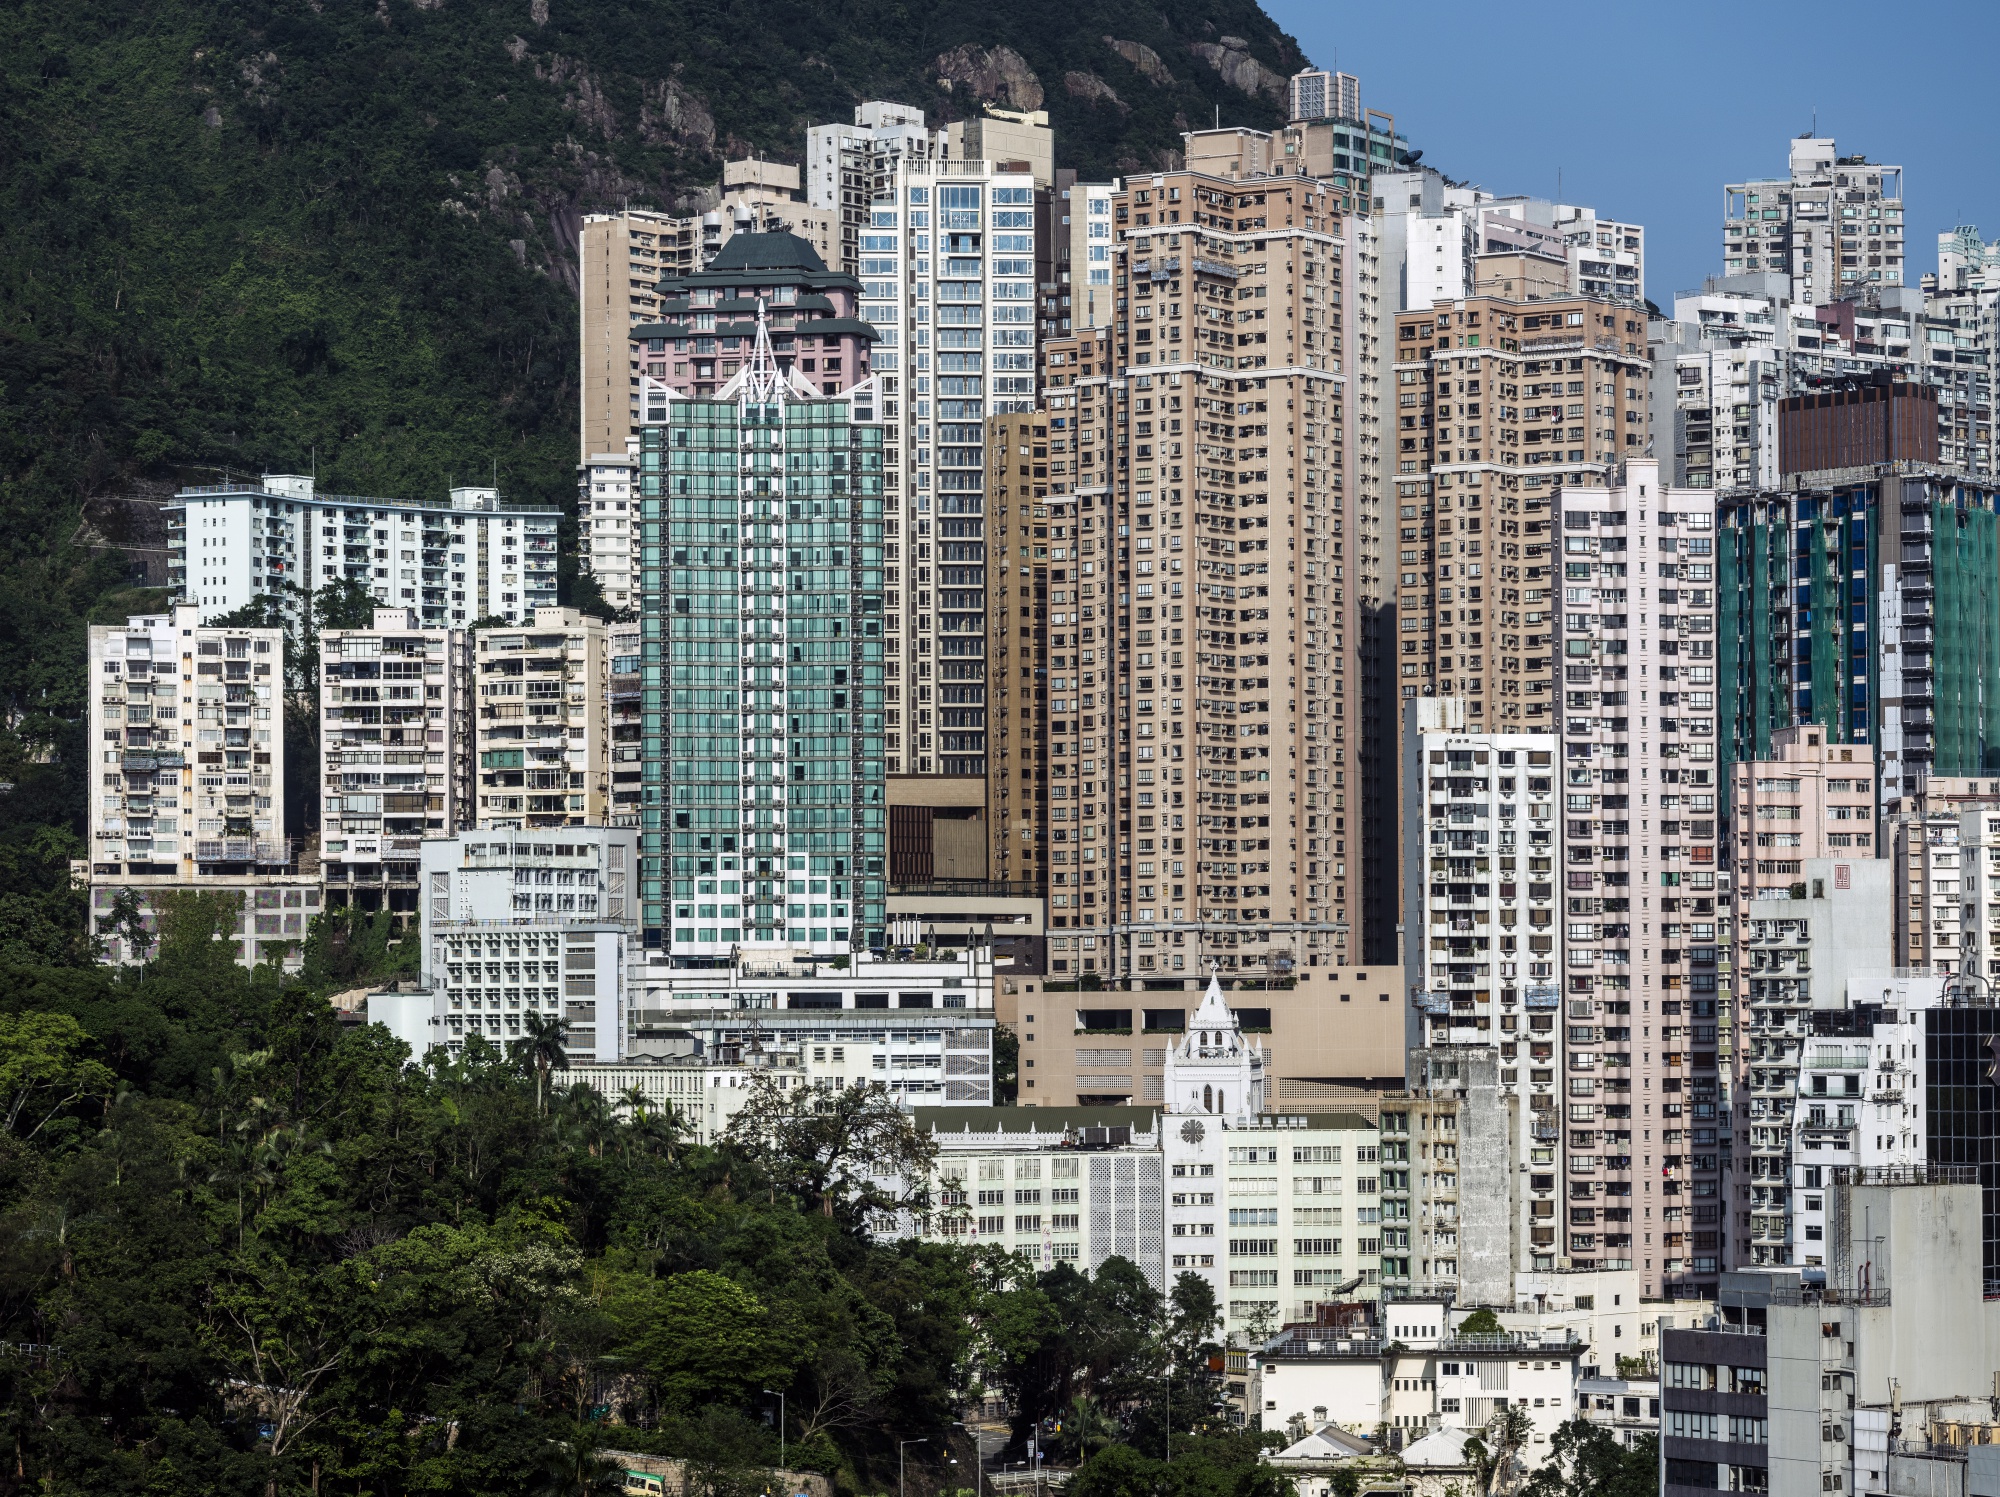 Hong Kong Real Estate: Why City's Office Towers Are So Empty - Bloomberg